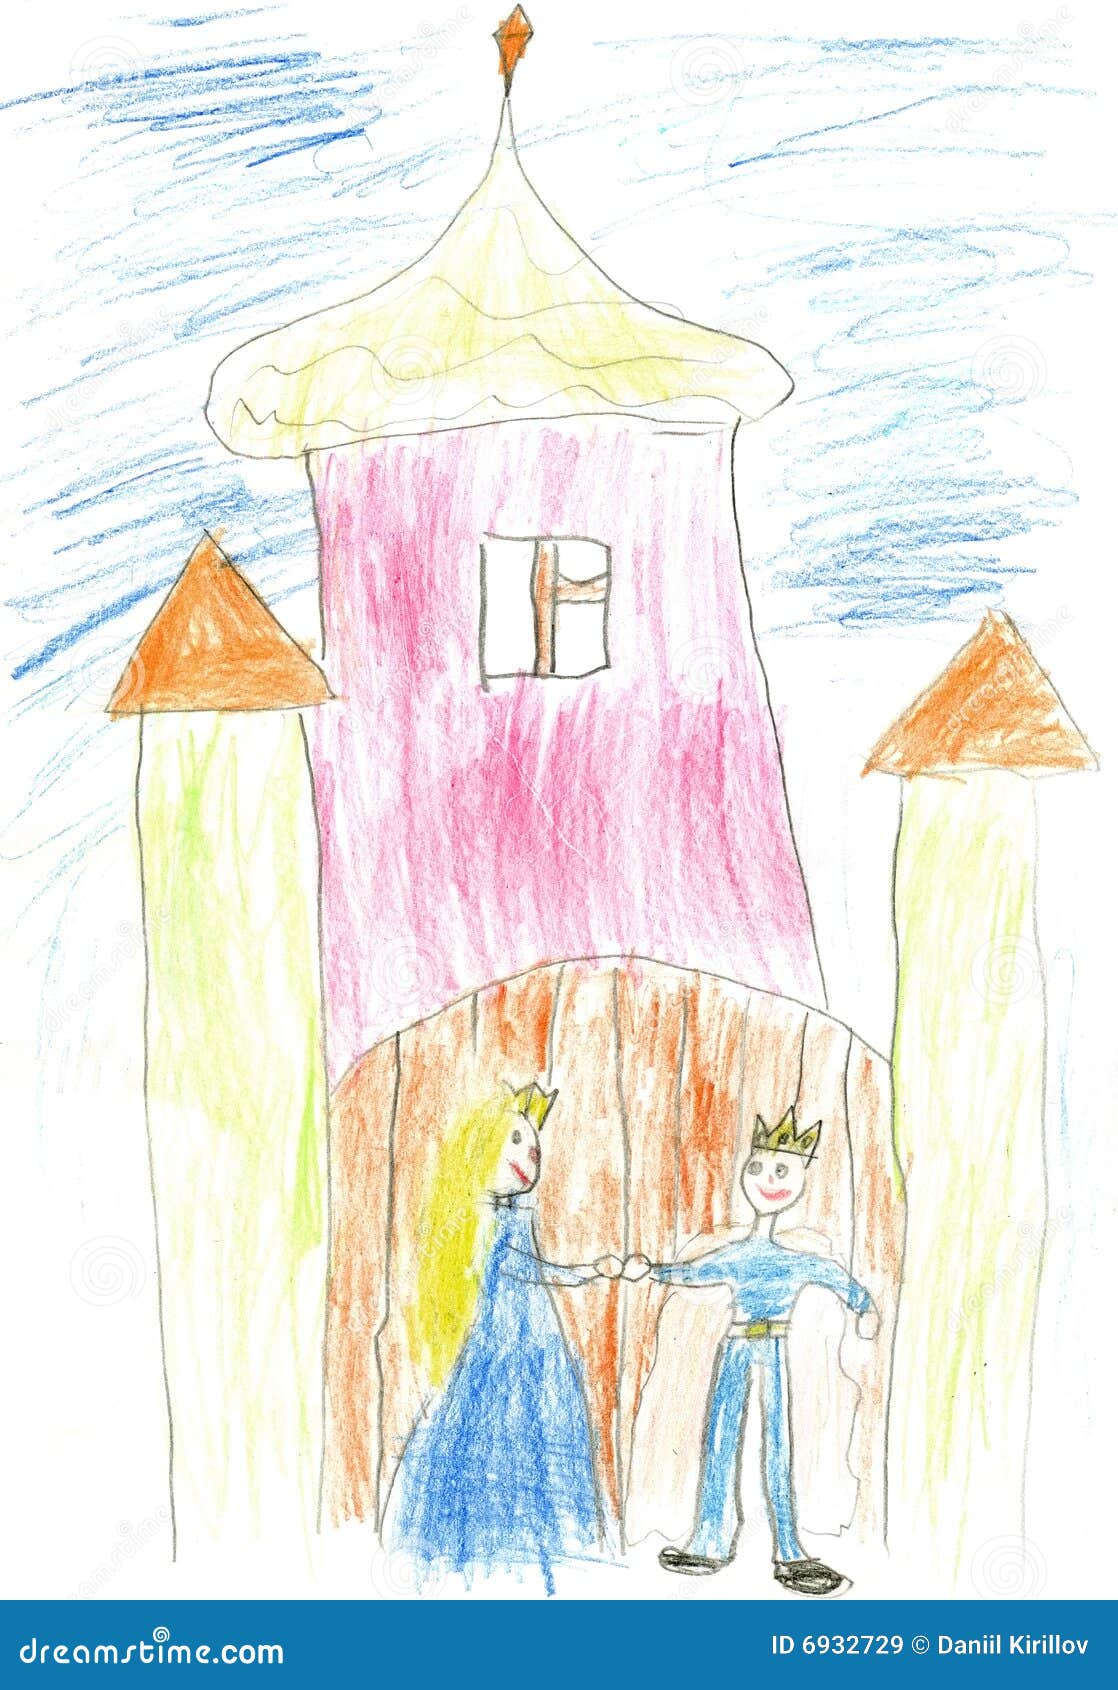 drawing of castle for kids - Clip Art Library